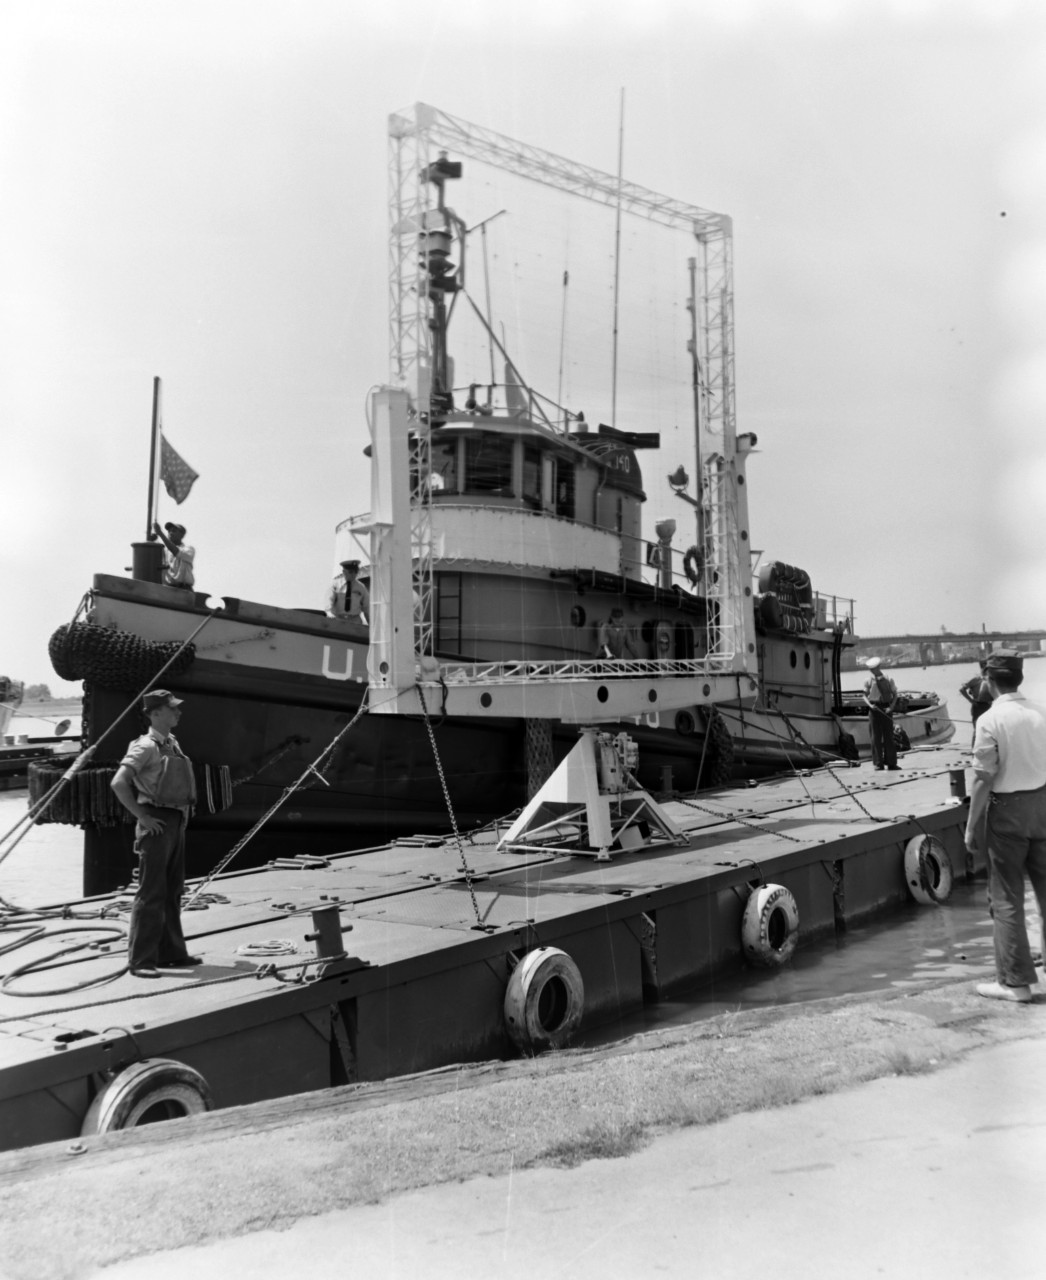 NMUSN-1017:   XAF Radar Antenna, 1960s.   Being delivered to the Washington Navy Yard for display.  Note the U.S. Navy tug alongside a small thin barge carrying the radar antenna.  The tug appears to be USS Wahtah (YTB-140).  This radar was the first shipboard radar to be installed onboard a U.S. Navy ship, USS New York (BB-34).  Surviving World War II, it was brought to the Washington Navy Yard where it was on exterior display until the mid-1980s where it was placed into storage.   Following conservation, the radar is now on display at the National Electronics Museum, Linthicum, Maryland.    Original is a black and white negative.   National Museum of the U.S. Navy Photograph Collection.